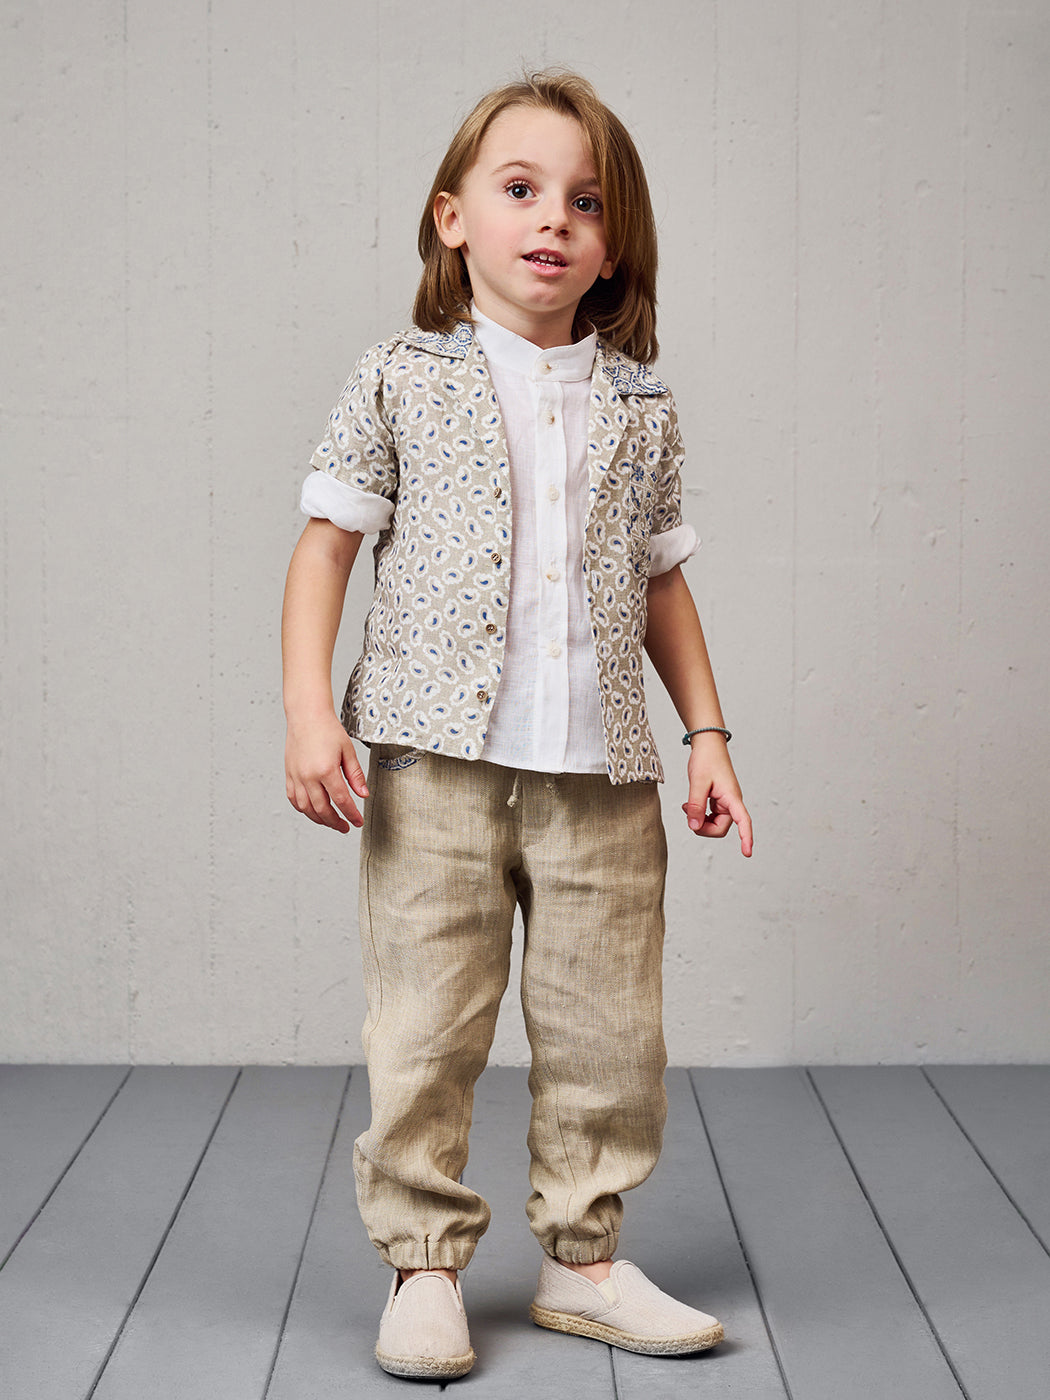 Baptism Linen outfit in bohemian style - CEYMAN